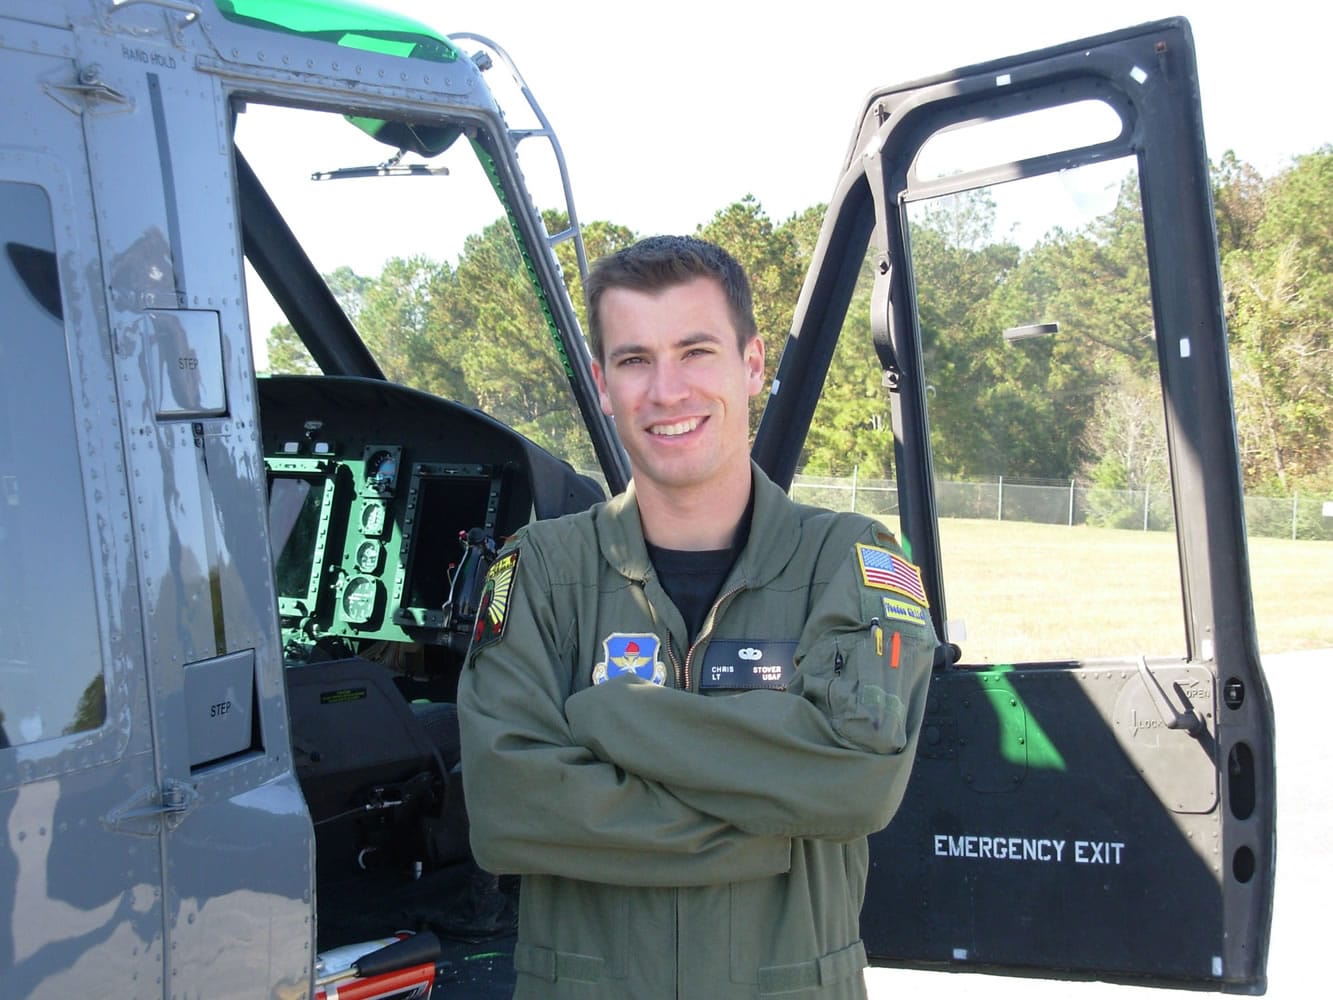 Air Force Capt. Christopher Stover graduated from Vancouver's Evergreen High School. A helicopter pilot, he died in a training accident in England on Jan.